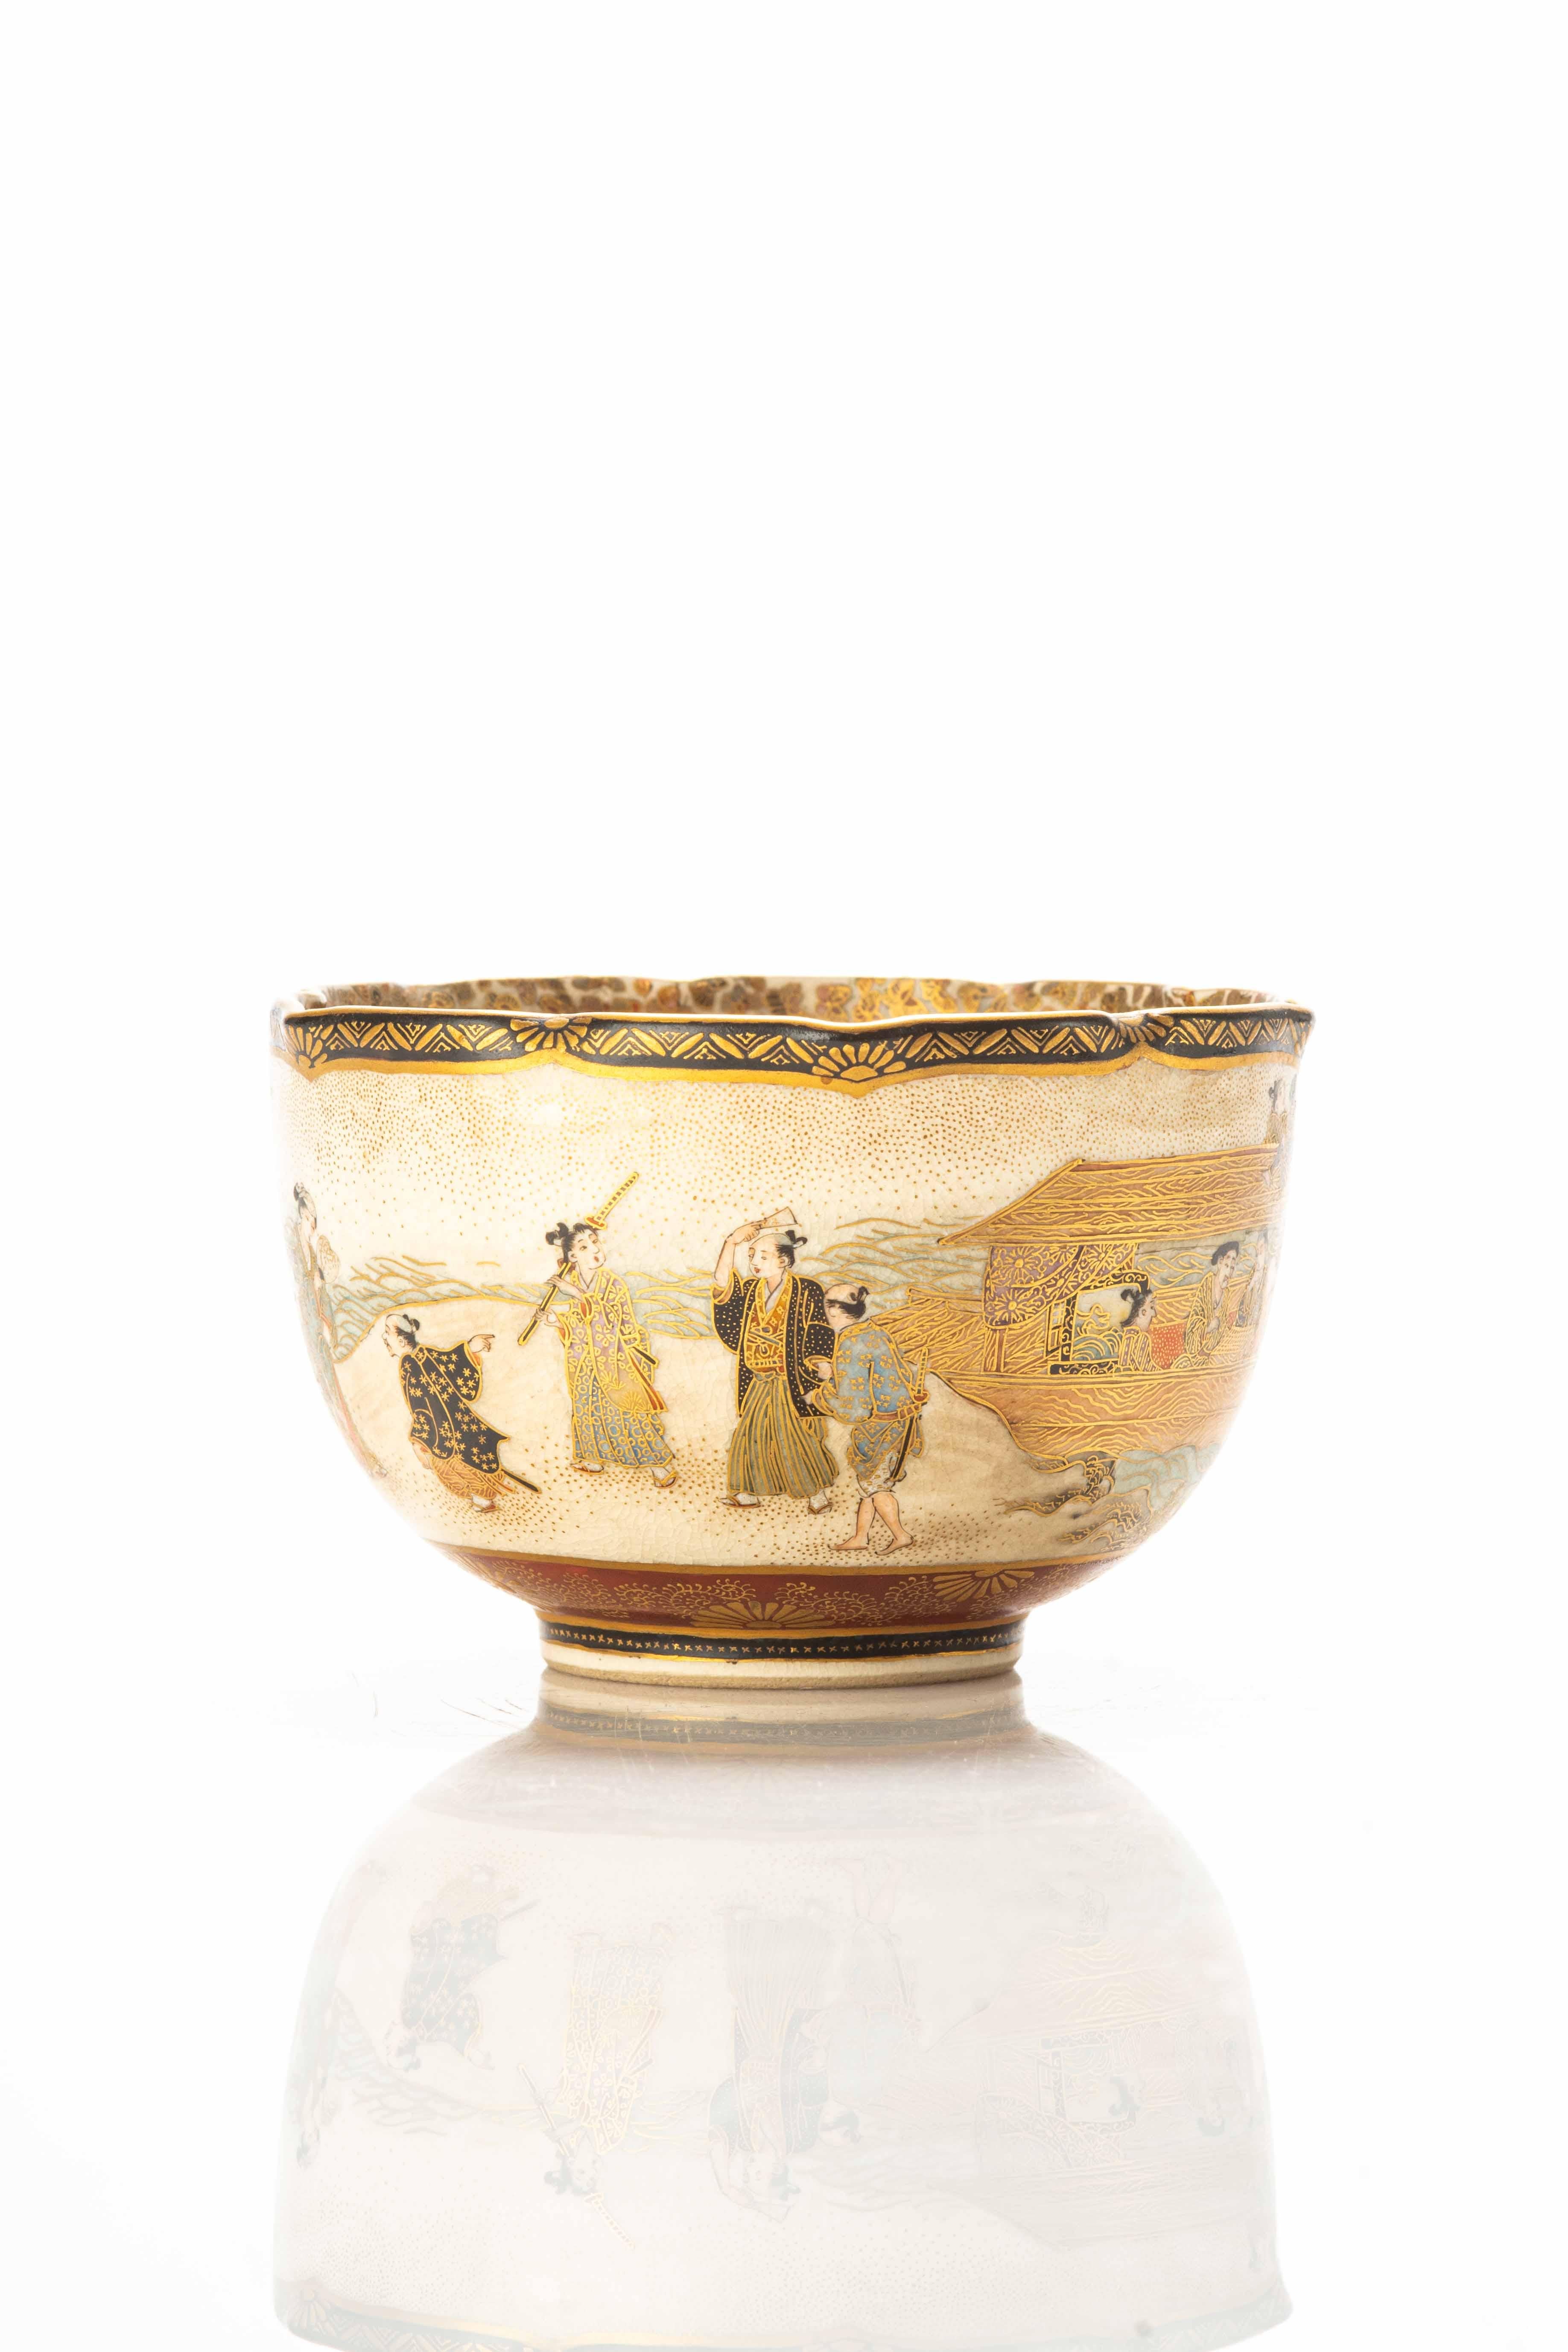 Satsuma ceramic lobed bowl with curved corners and embellished with a refined scene of daily life along a watercourse on the outside. The interior is adorned with graceful butterflies, creating a harmonious blend of nature and craftsmanship.

This